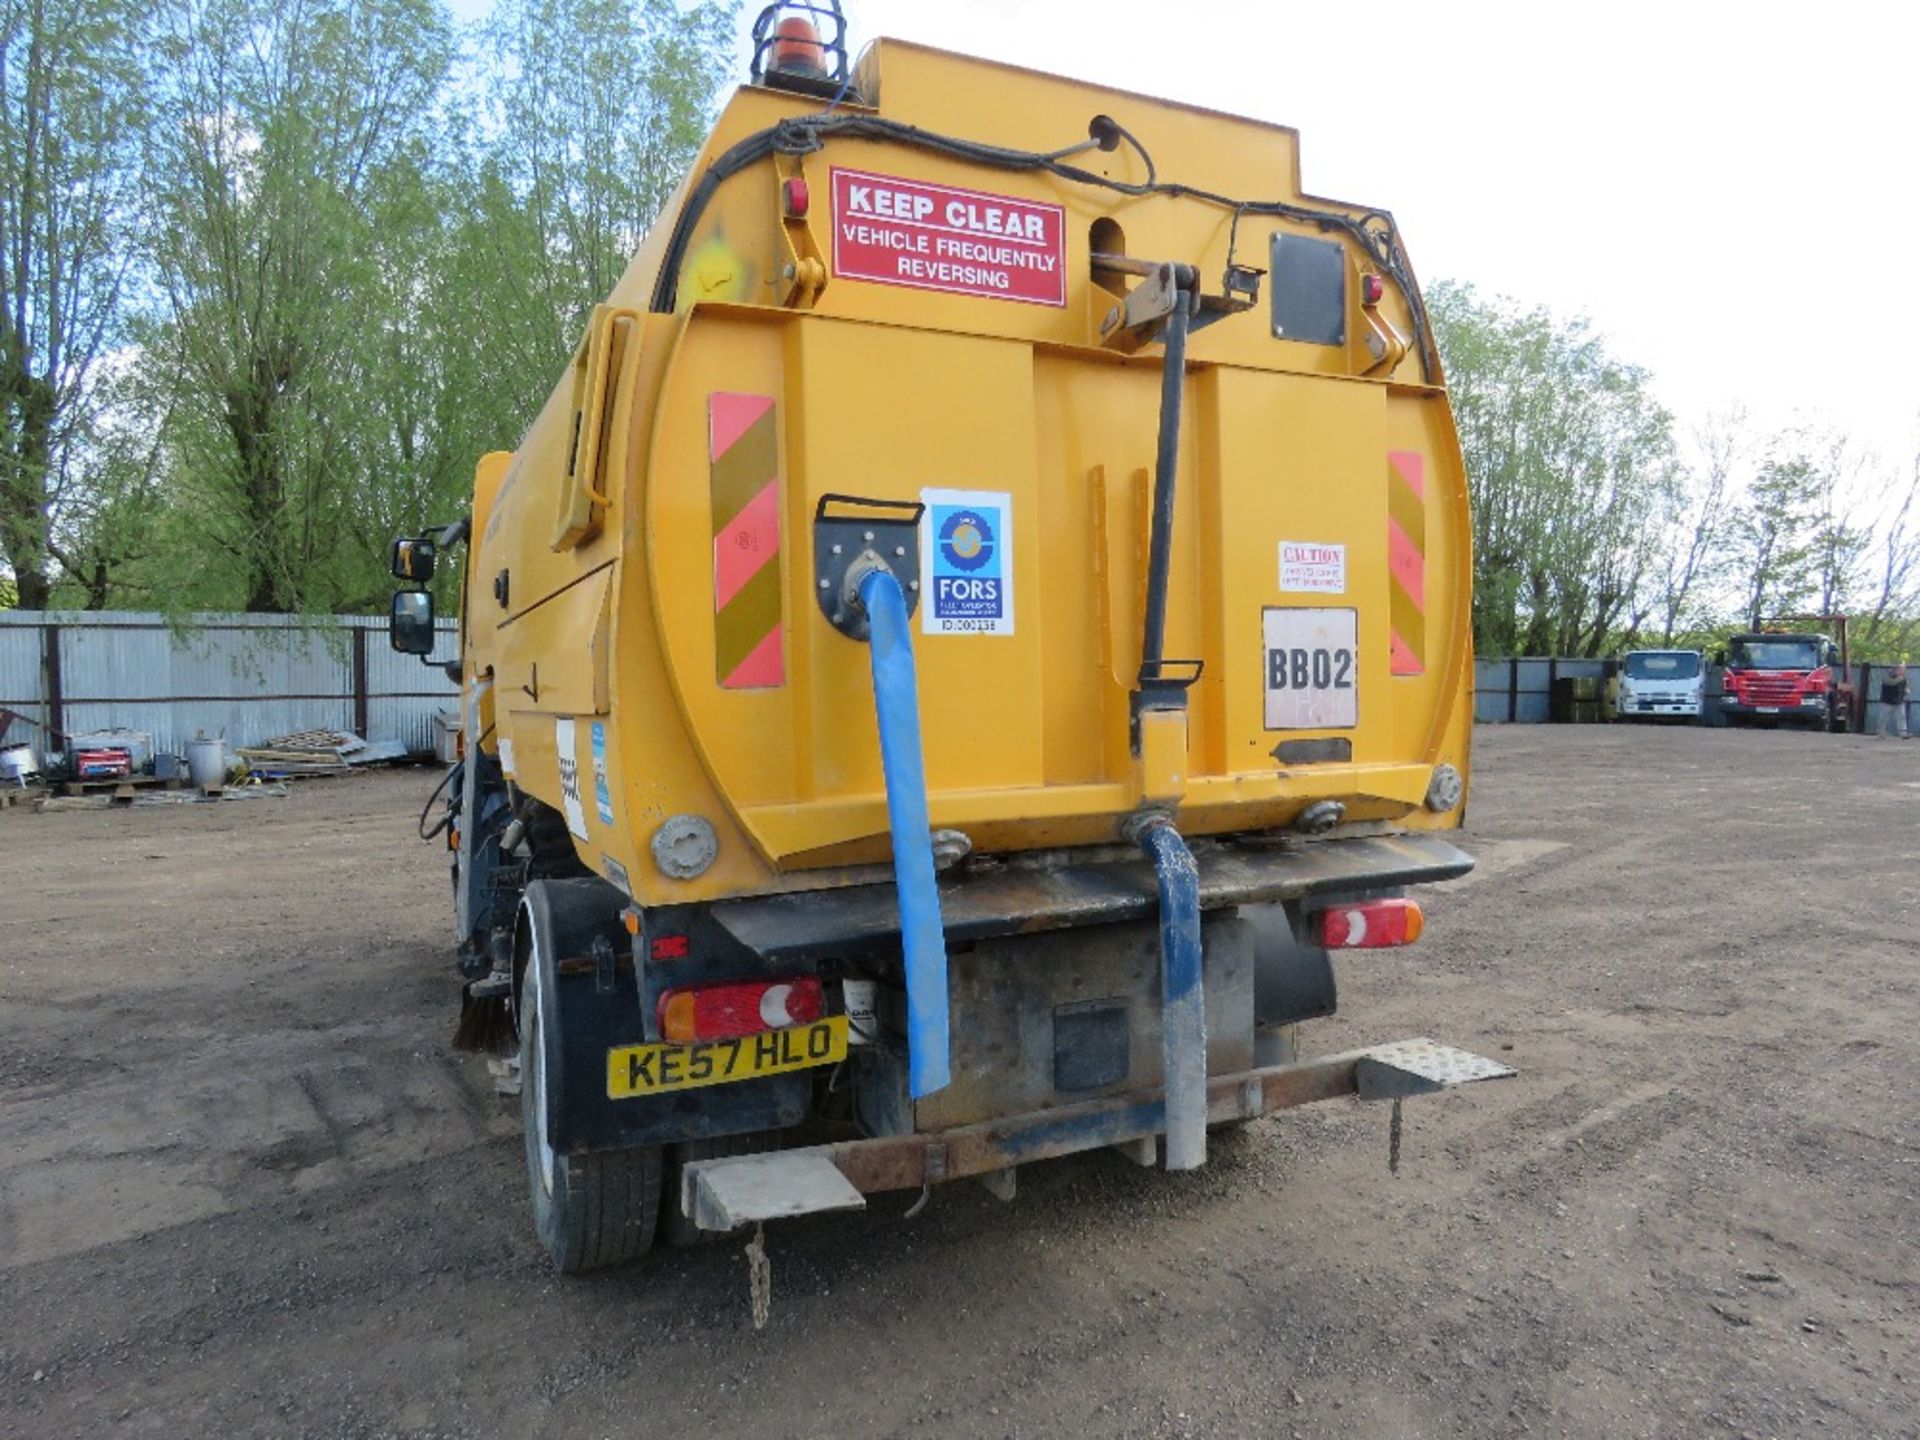 DAF LF JOHNSON ROAD SWEEPER REG:KE57 HLO. 131,934 REC KMS. WITH V5. MOT EXPIRED. FROM LOCAL COMPANY - Image 6 of 20